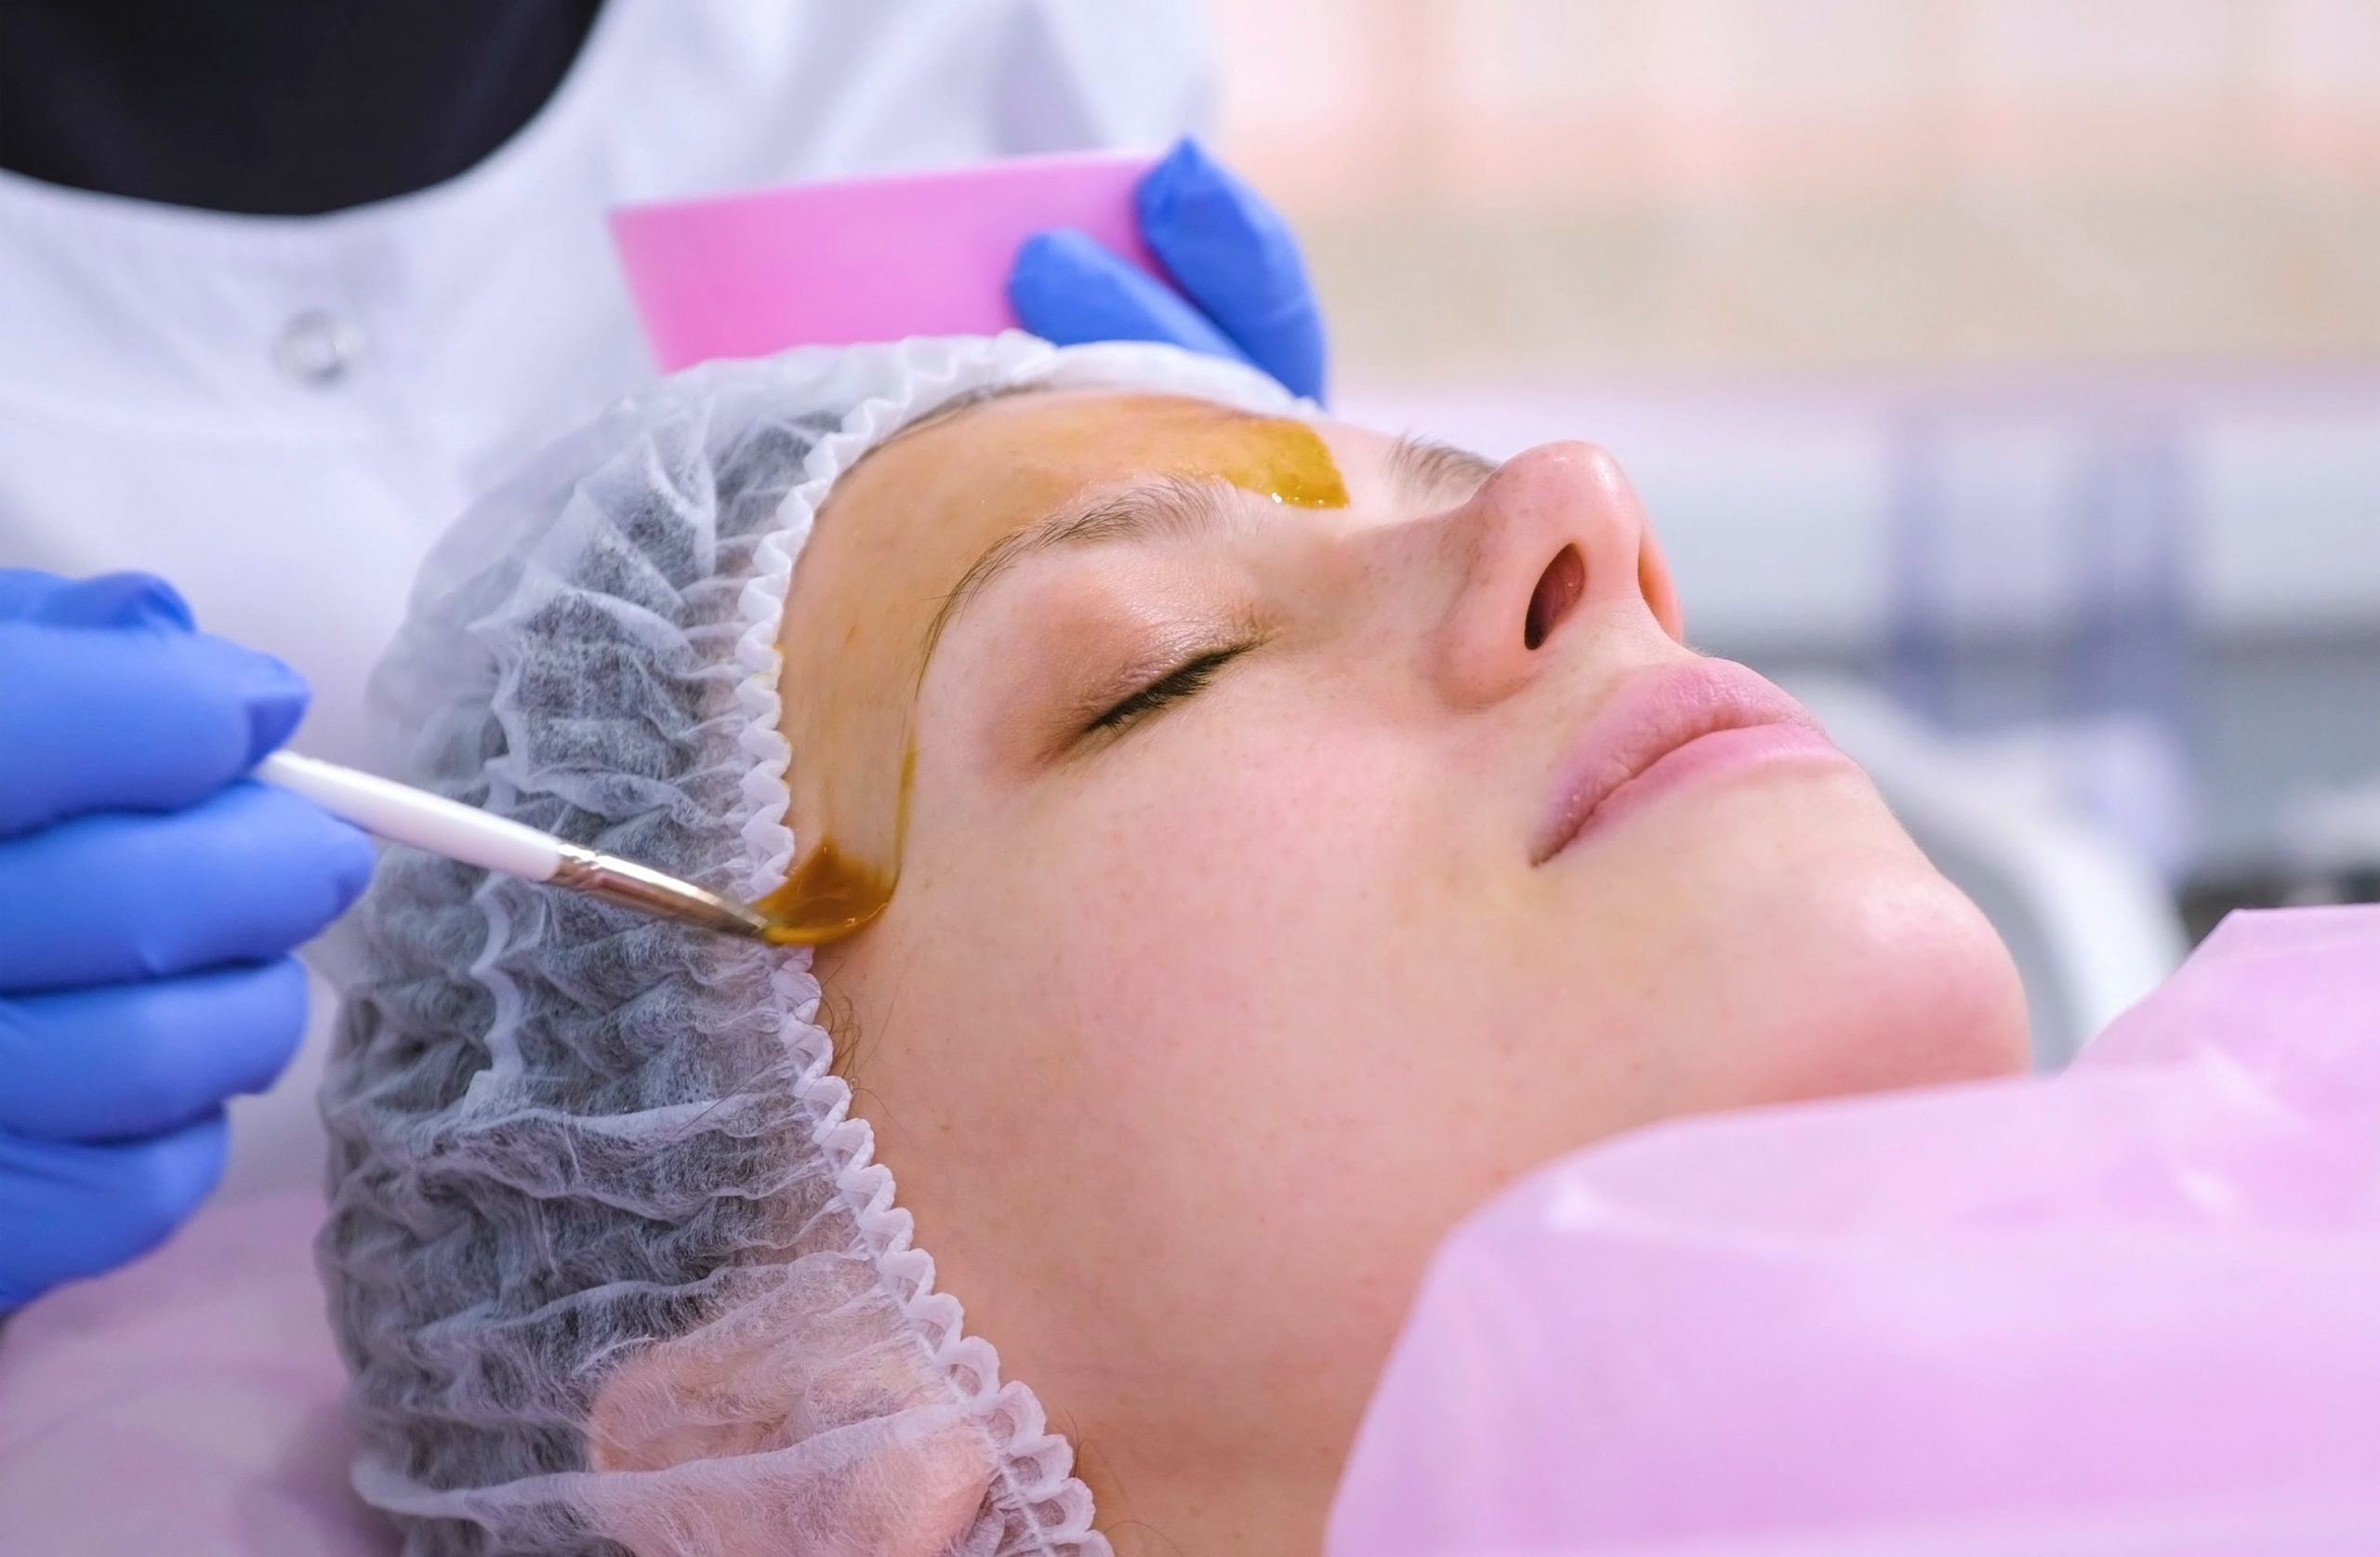 A Female getting chemical peels on her face | Aesthetic Artistry in Botox Burke, VA